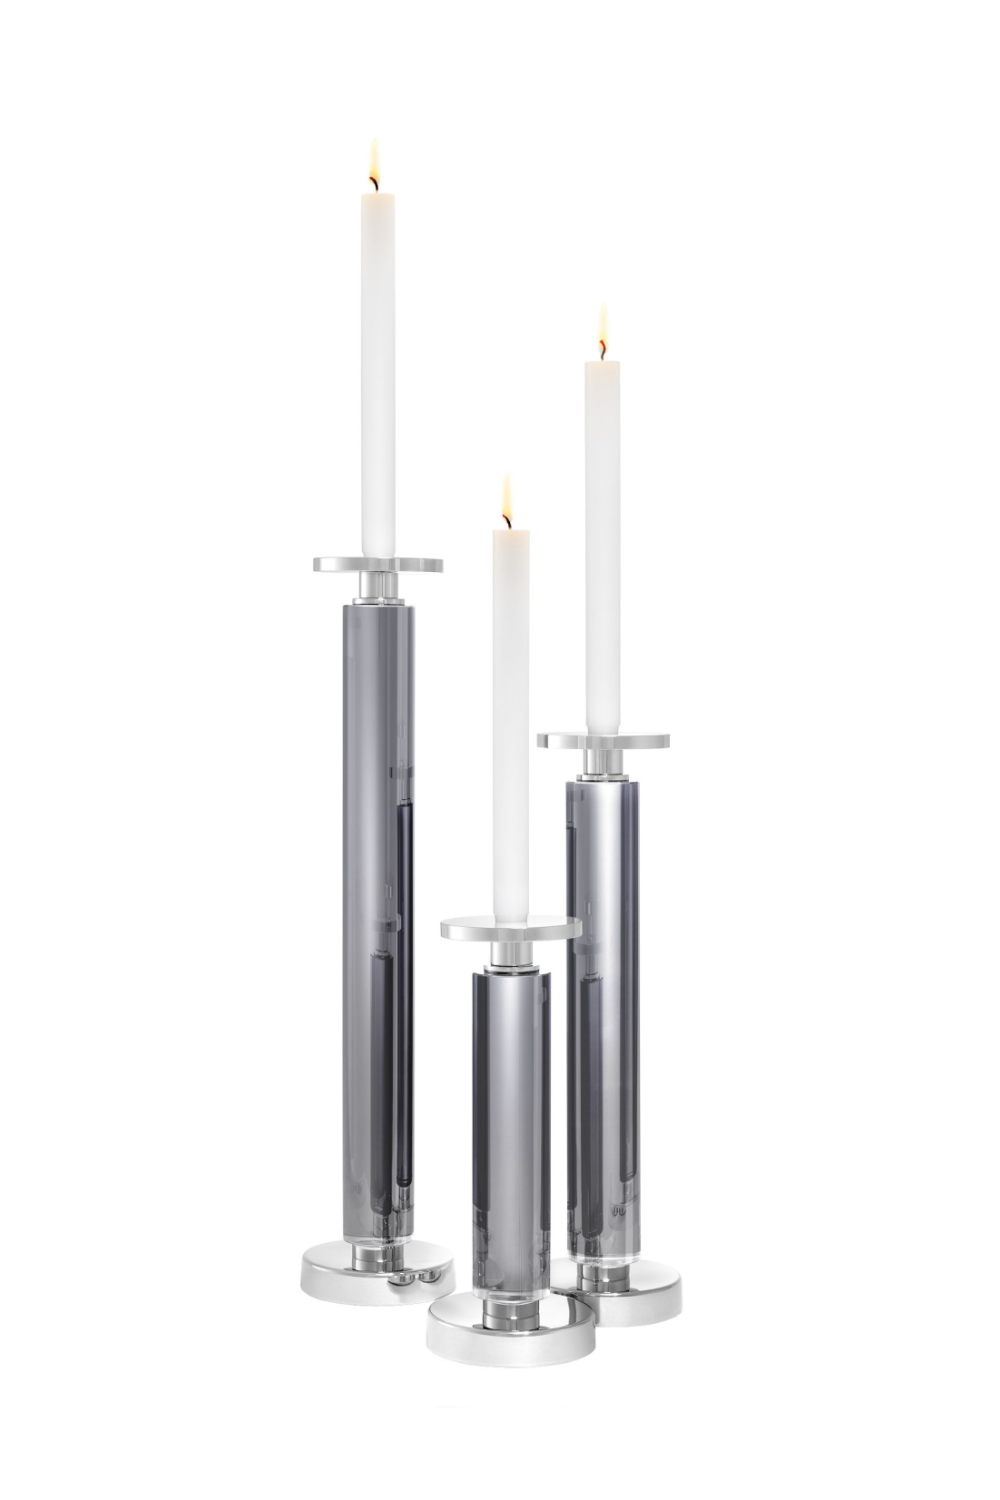 Smoke Crystal Glass Candle Holder Set of 3, Eichholtz Chapman